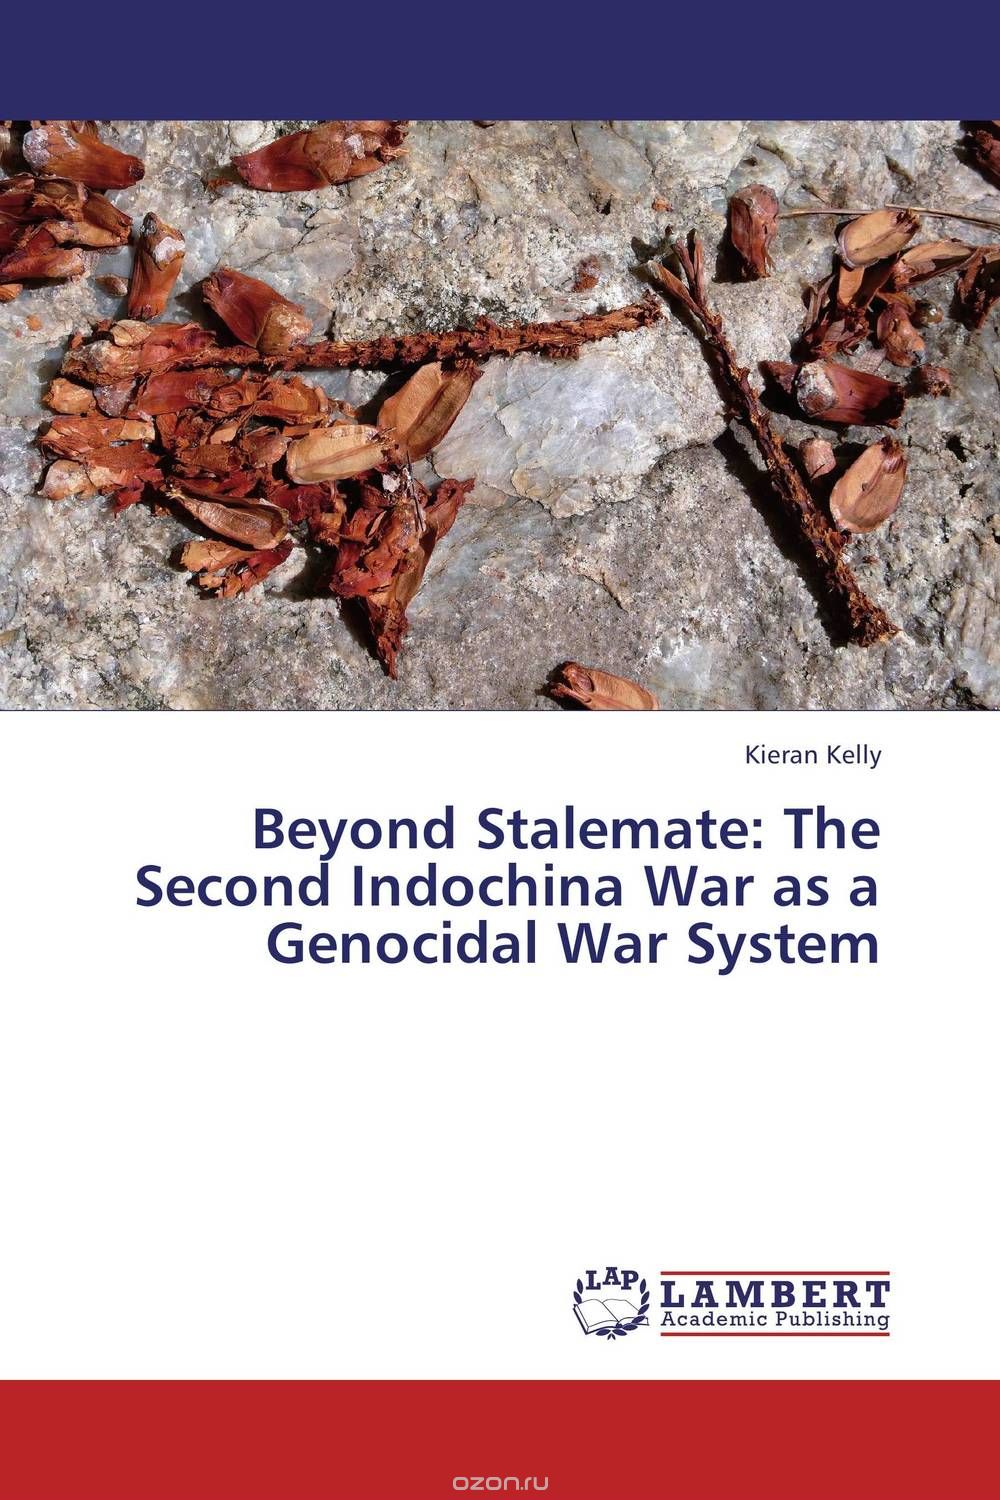 Beyond Stalemate: The Second Indochina War as a Genocidal War System